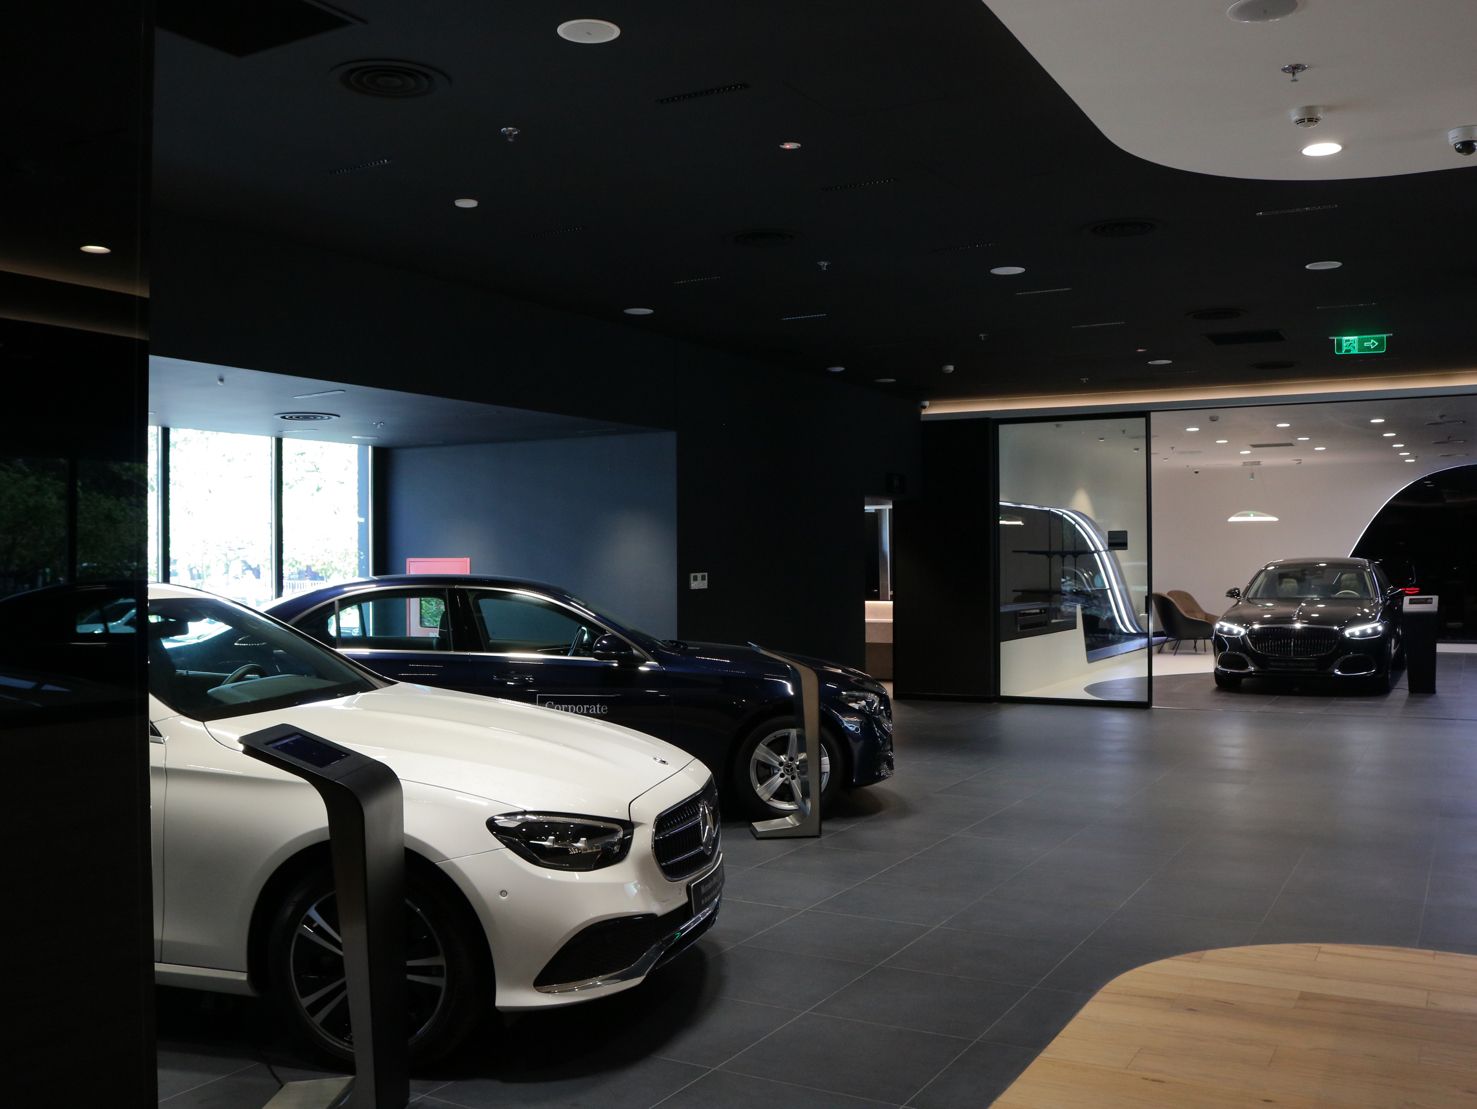 Mercedes-Benz Vietnam Star Truong Chinh showroom officially opens. First MAR2020 showroom in Ho Chi Minh City.